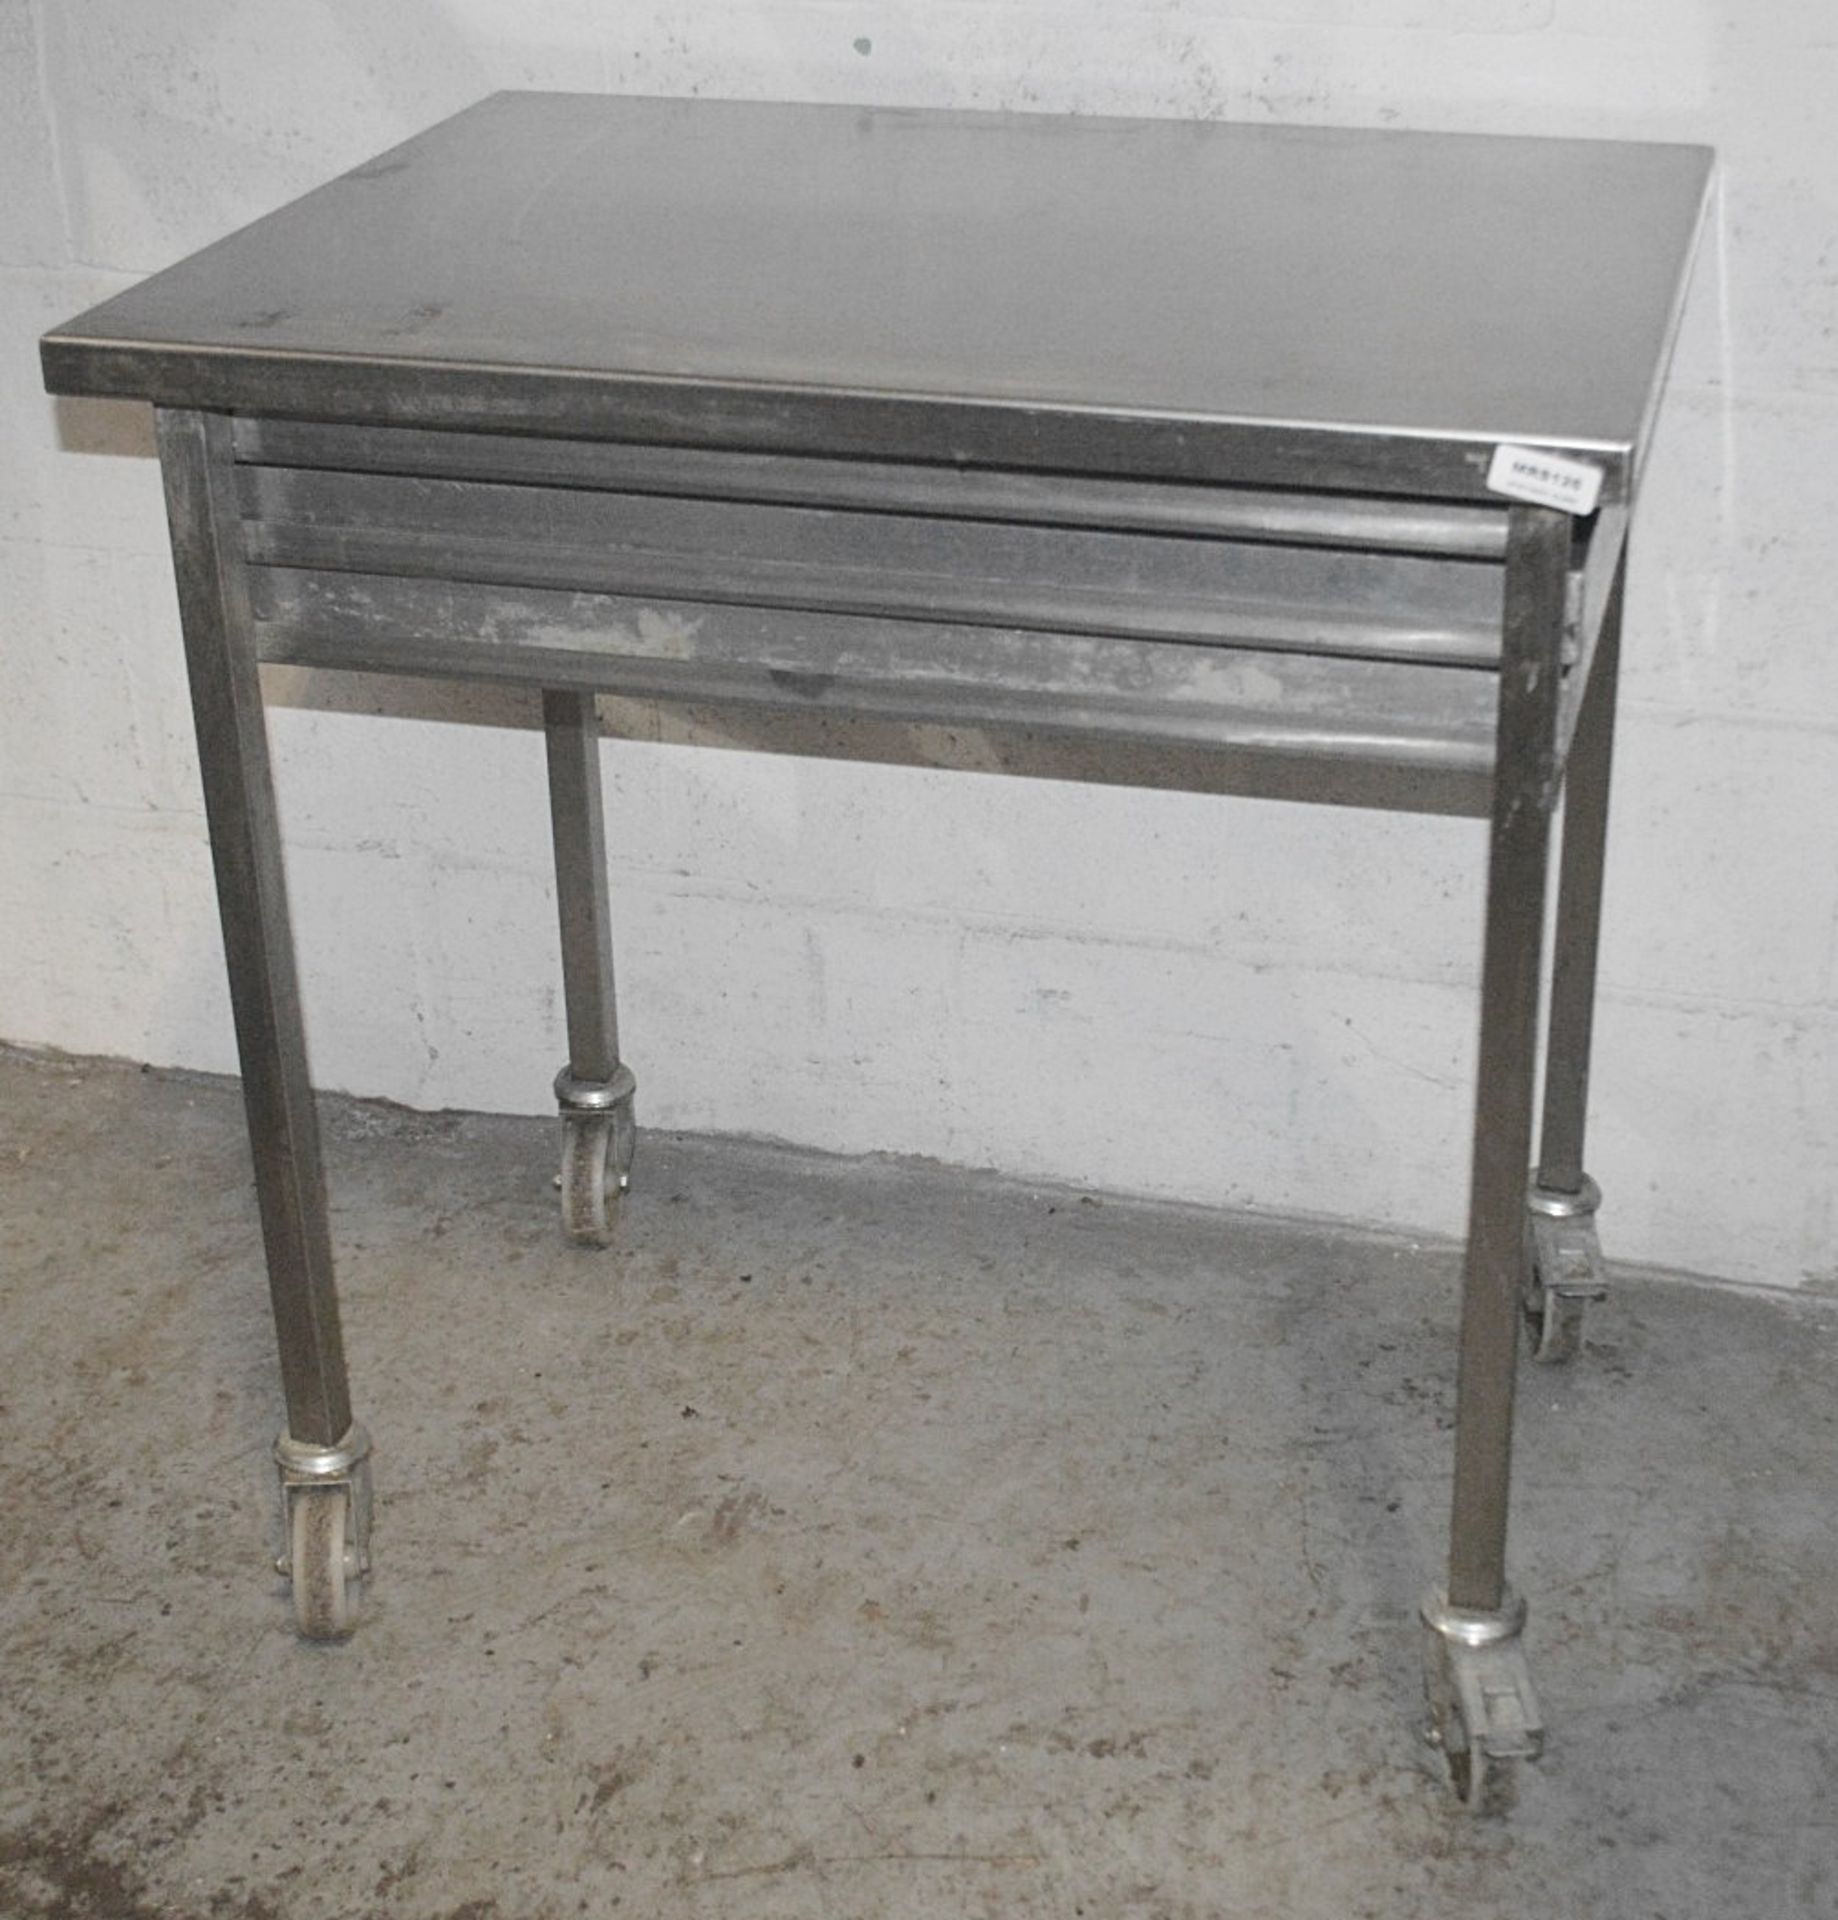 1 x Stainless Steel Commercial Kitchen 3-Drawer Prep Counter On Castors - Dimensions: H87 x W84 x - Image 3 of 4